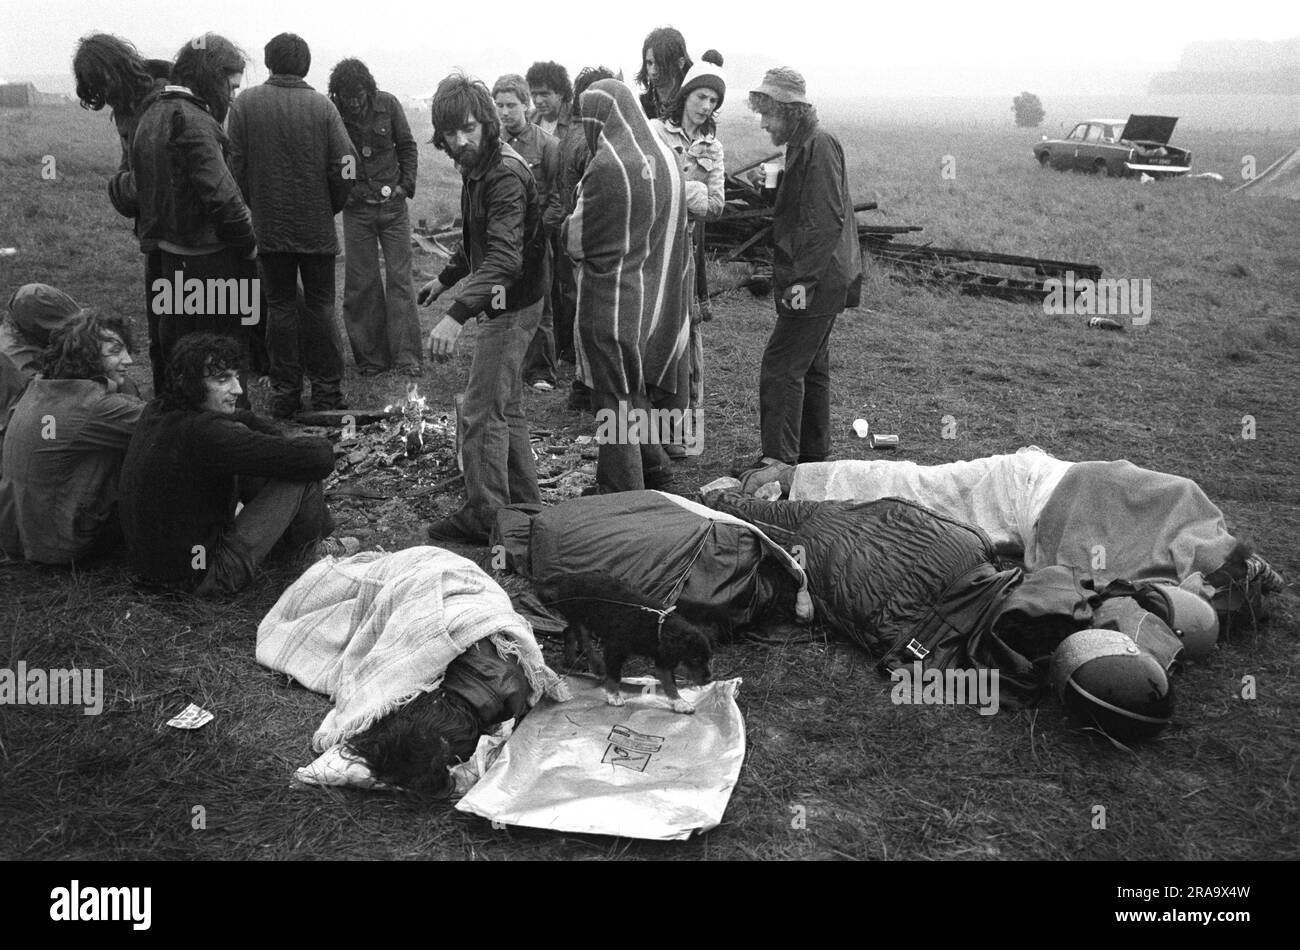 June 21st Summer Solstice. Stonehenge Free Festival at the summer solstice,  Festival goers up all night huddle around a camp fire, while others try and sleep in their sleeping bags. Wiltshire, England circa June 1976. 1970s UK HOMER SYKES Stock Photo